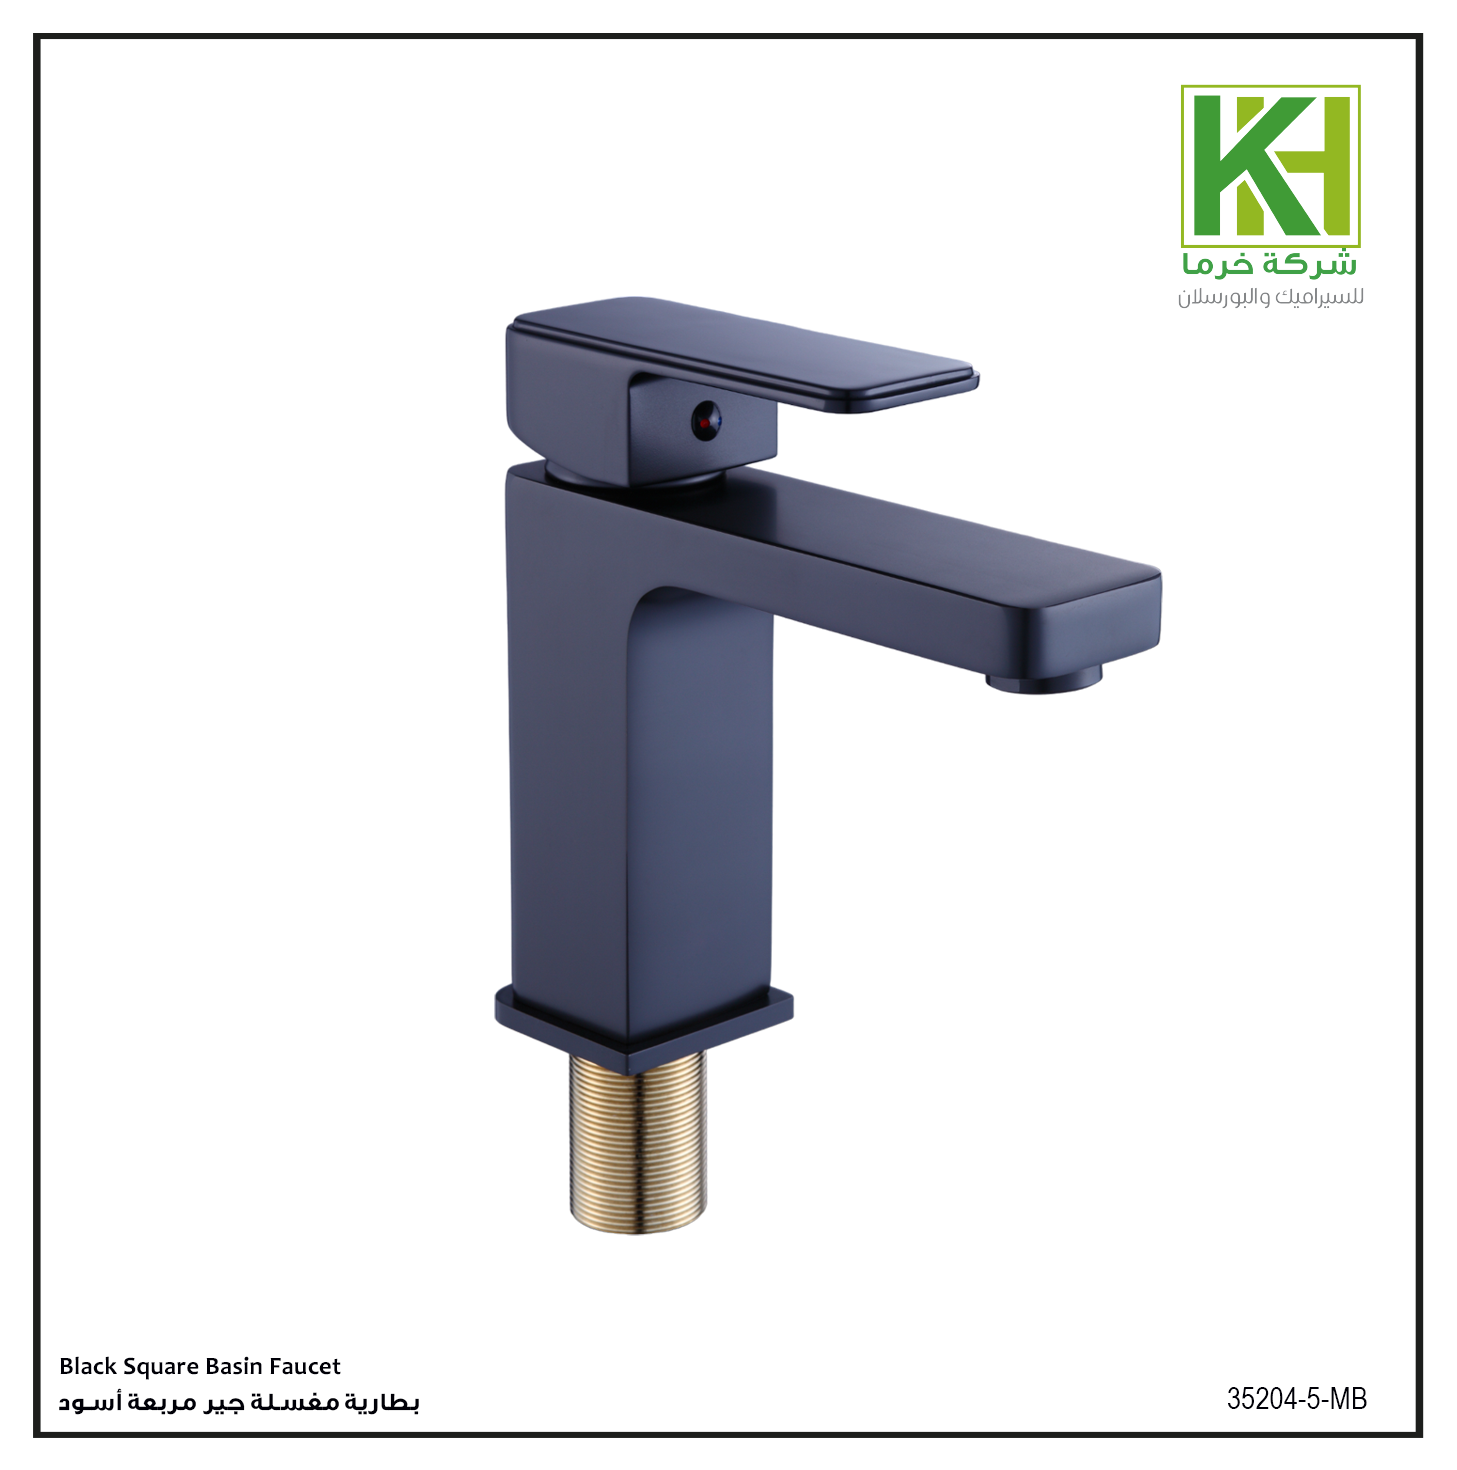 Picture of Black Square Basin Faucet